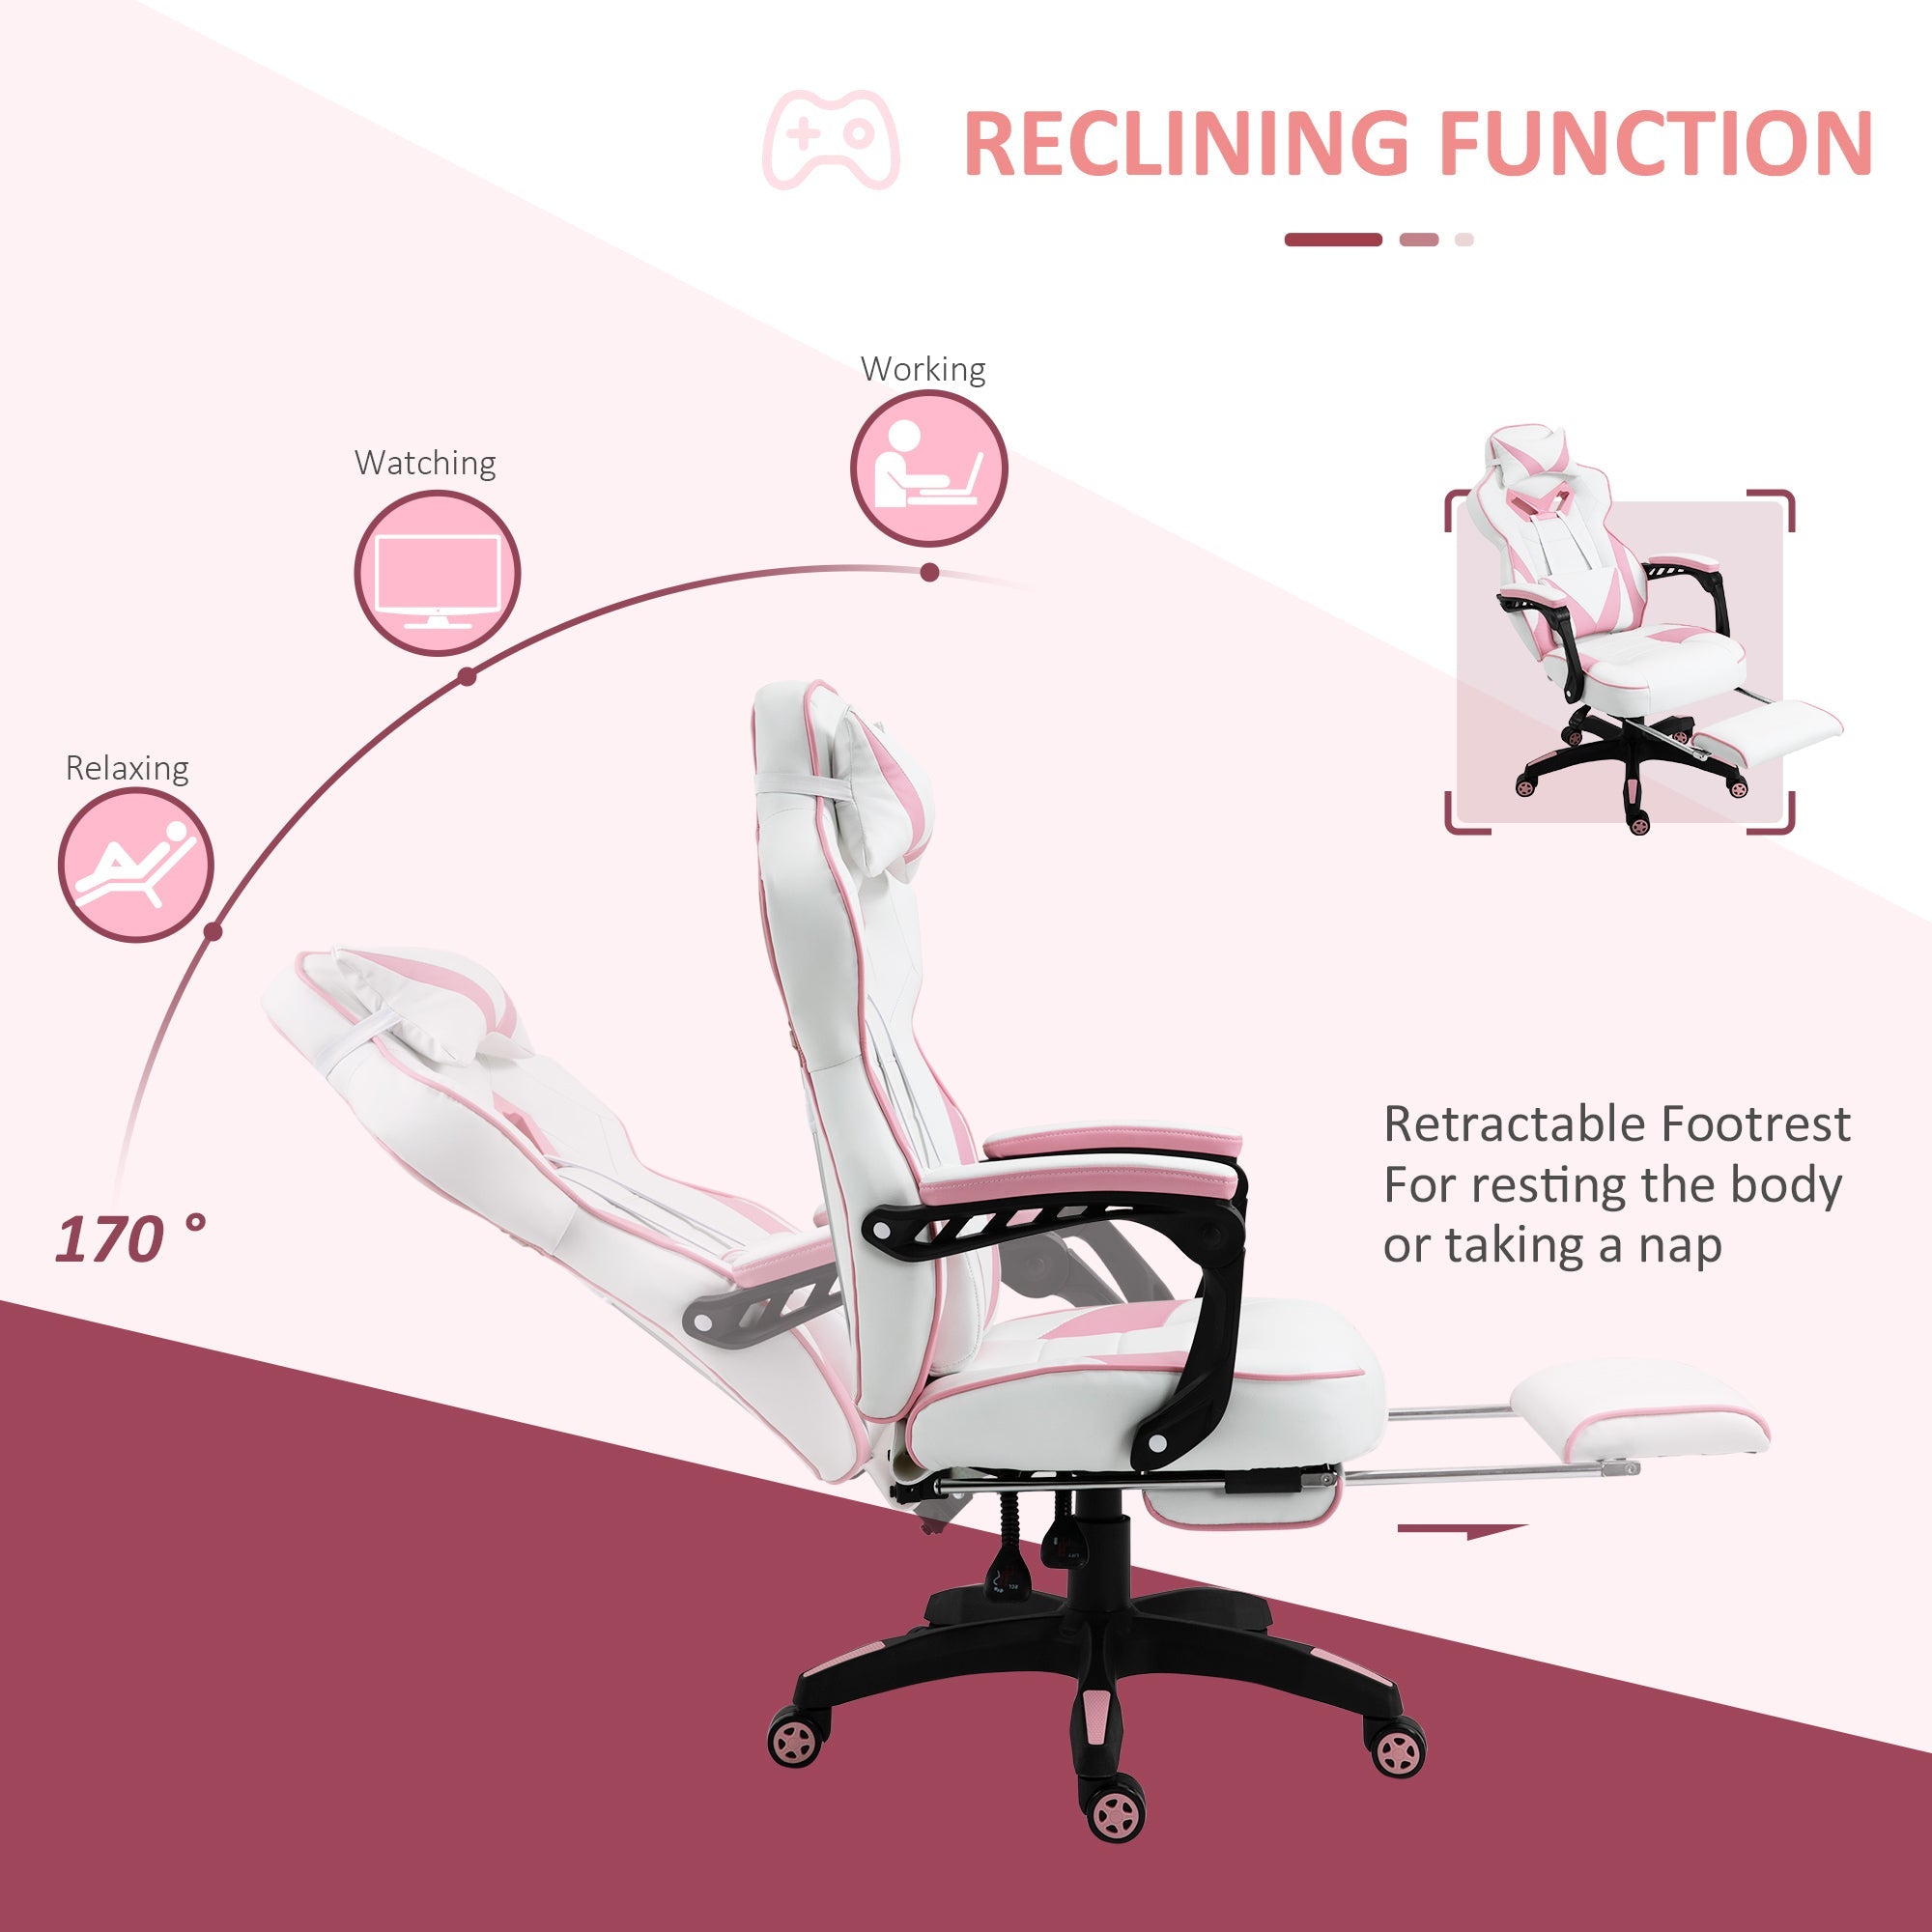 Ergonomic Racing Gaming Chair Office Desk Chair Adjustable Height Recliner with Wheels, Headrest, Lumbar Support, Retractable Footrest, Pink-4